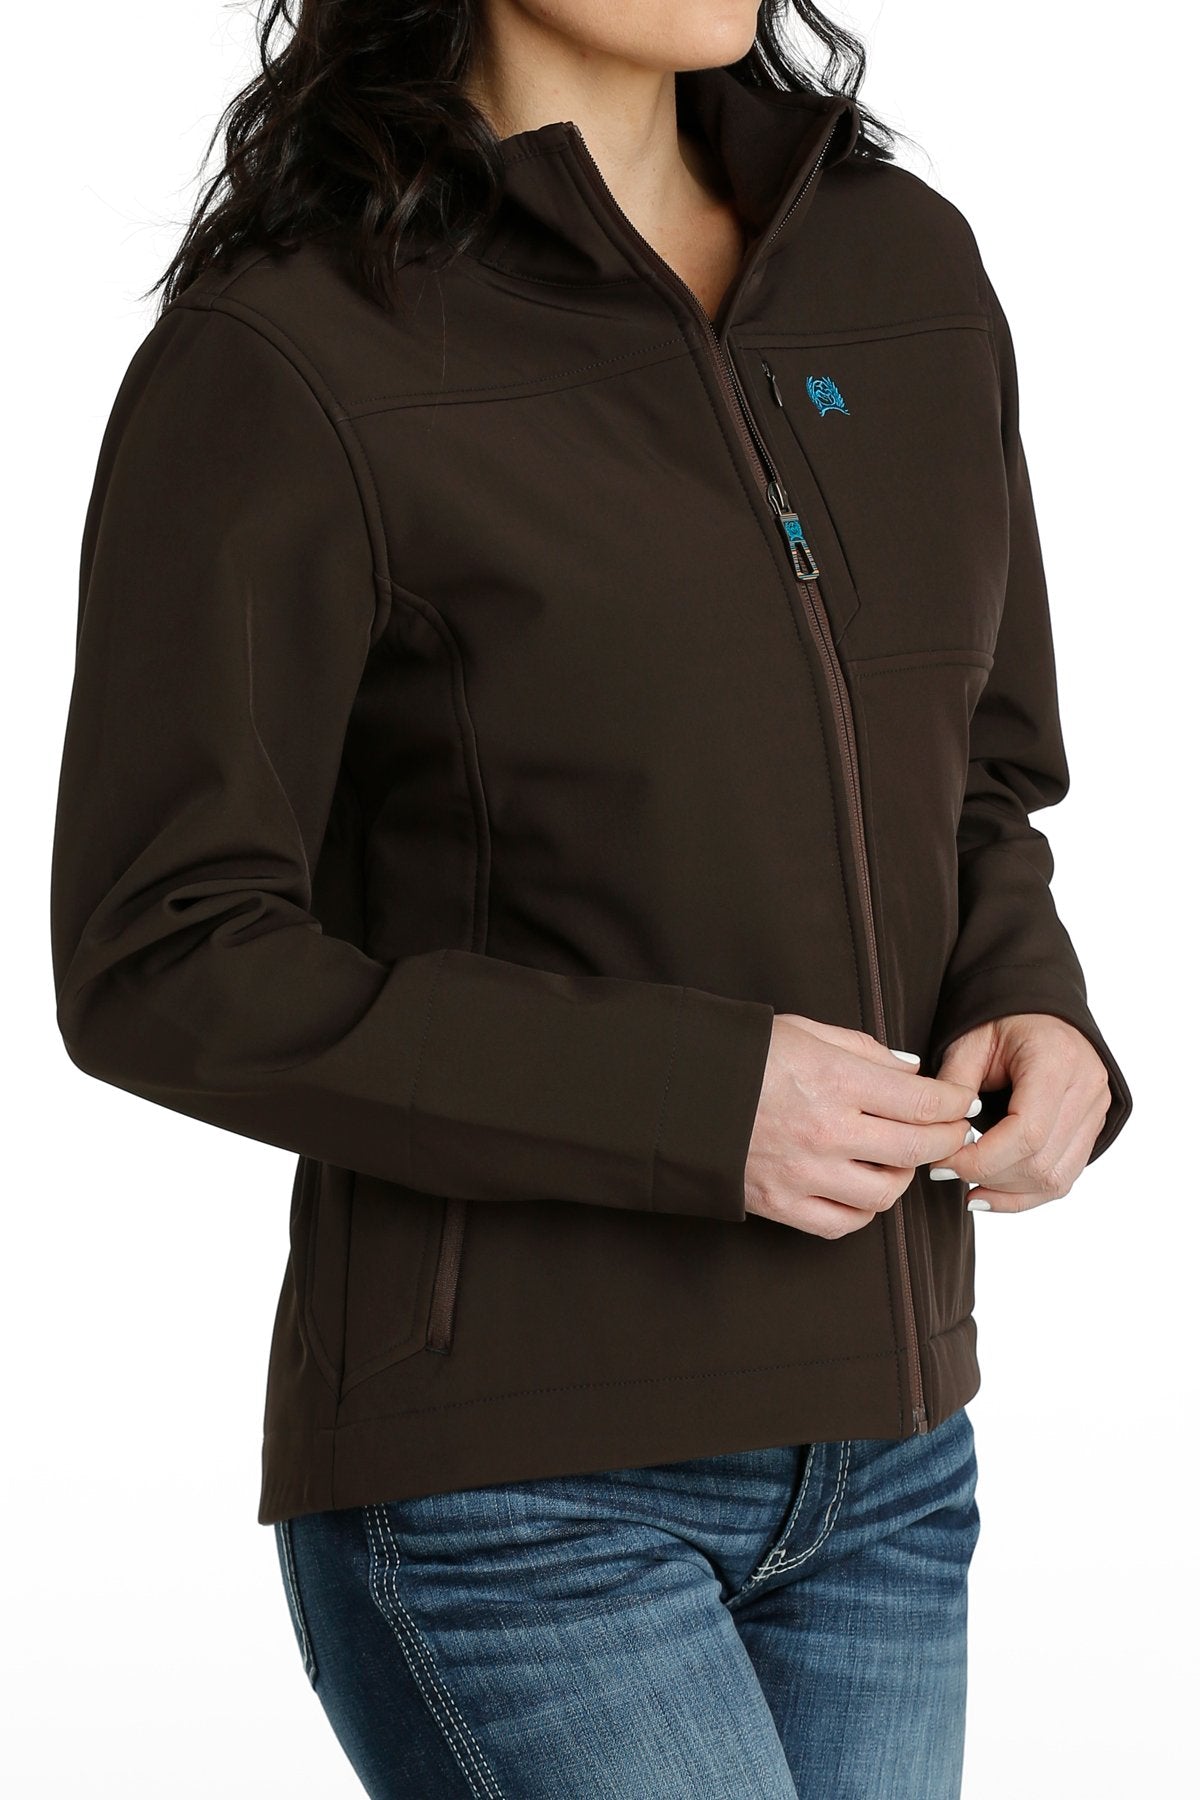 CINCH WOMENS BONDED CONCEALED CARRY JACKET